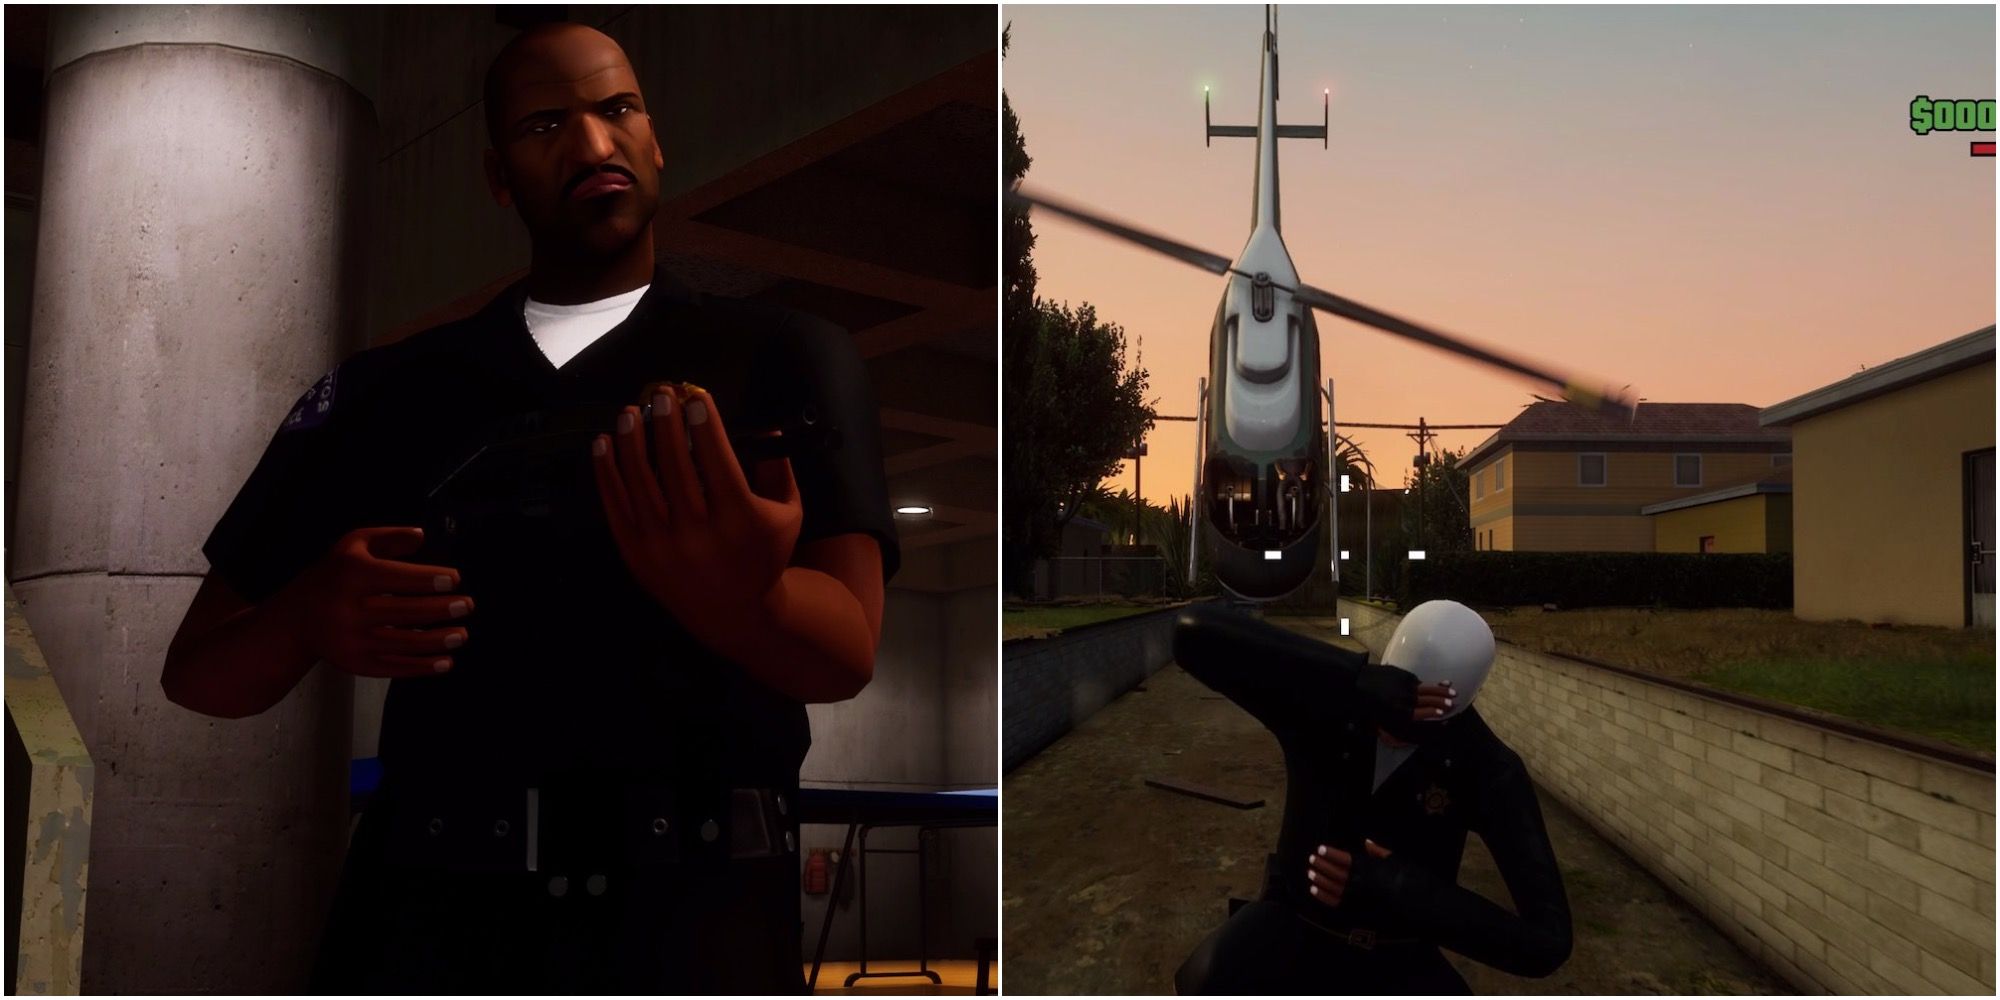 san andreas split image tenpenny and railshooting mission